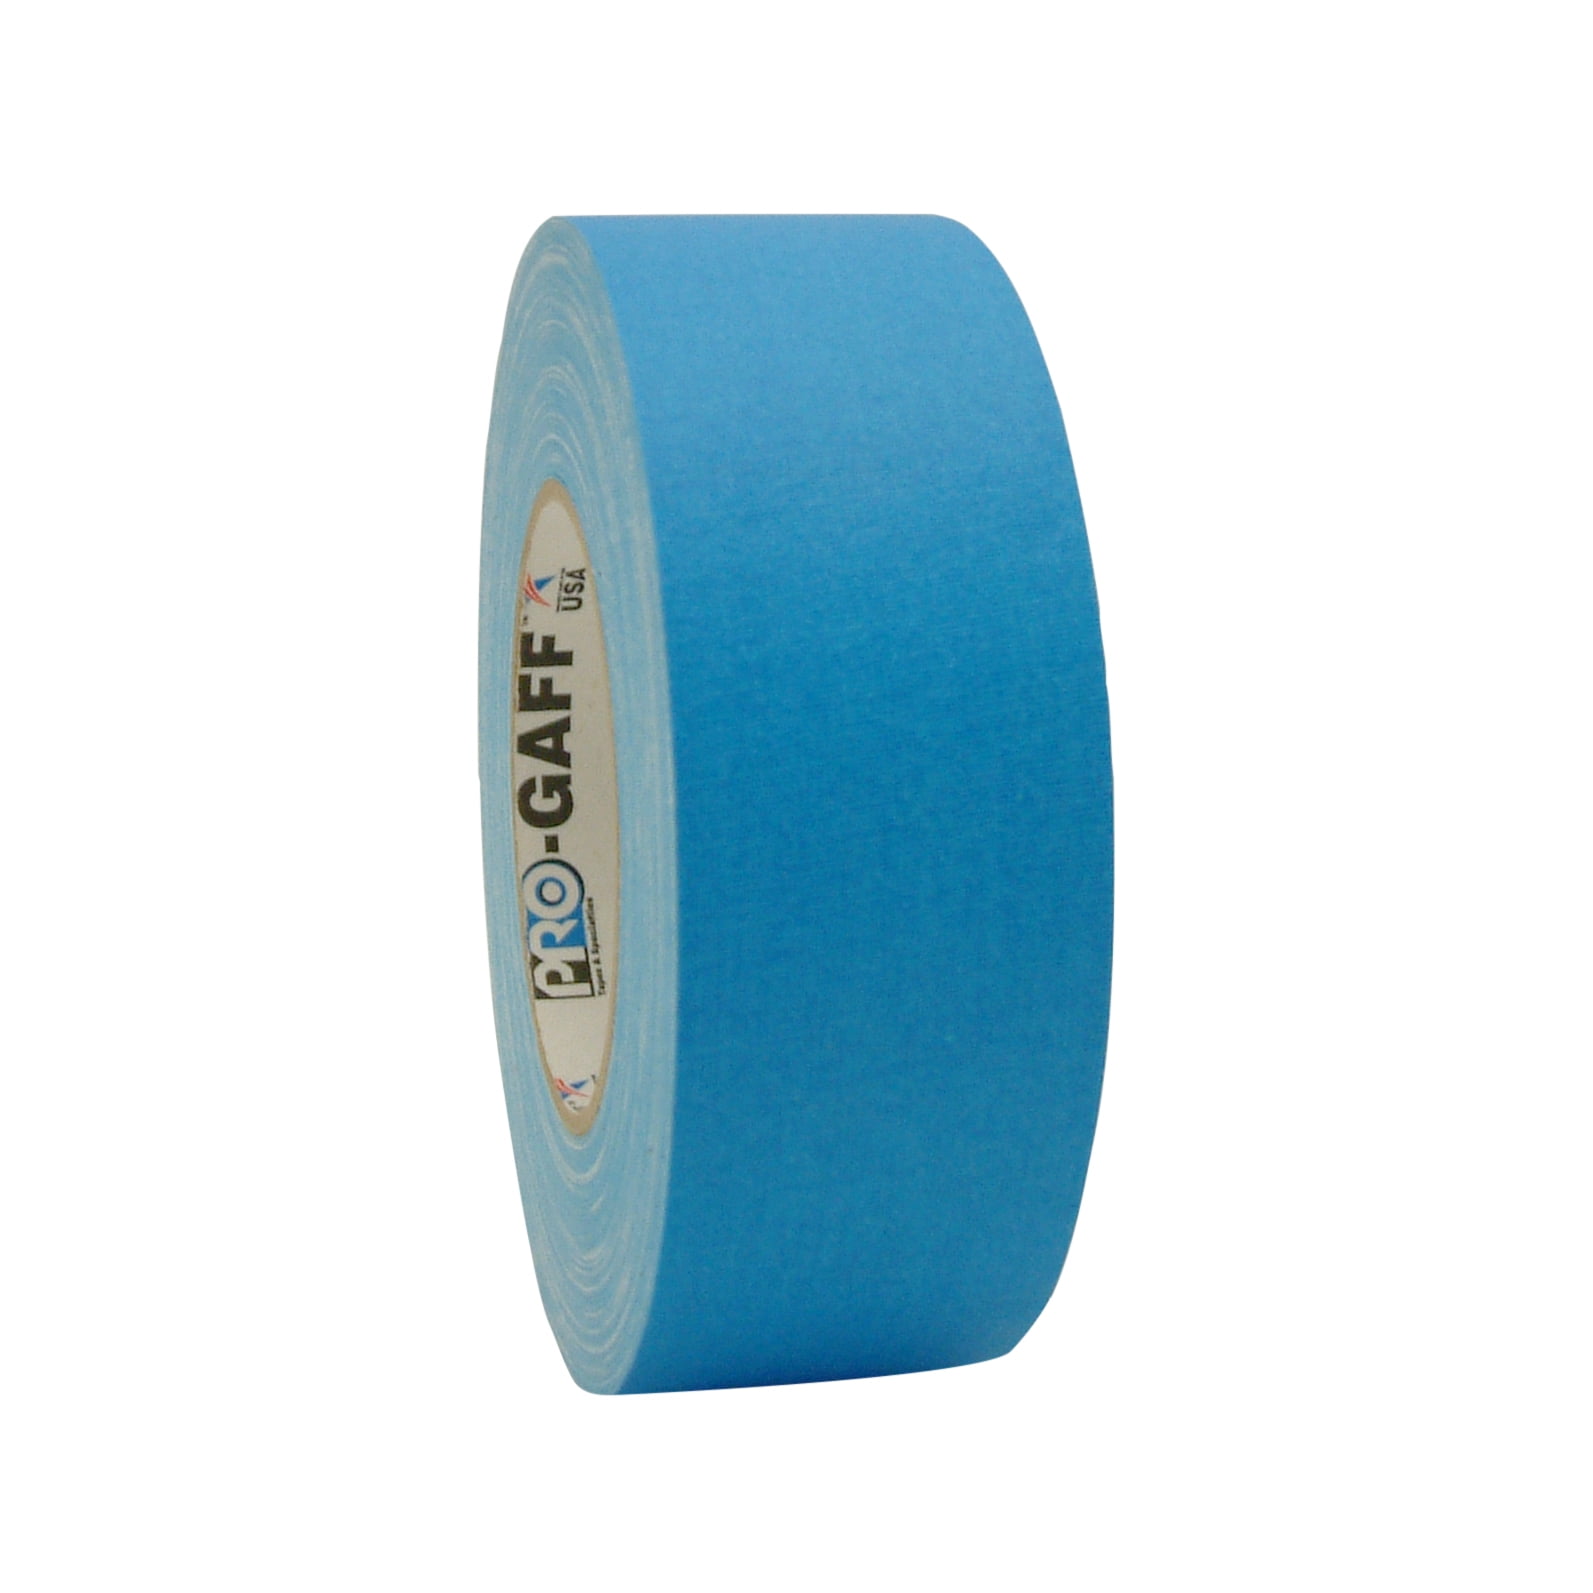 ProTapes Pro Gaff NEON GAFFERS TAPE 5 Color Pack 2" x 50 yd Roll 